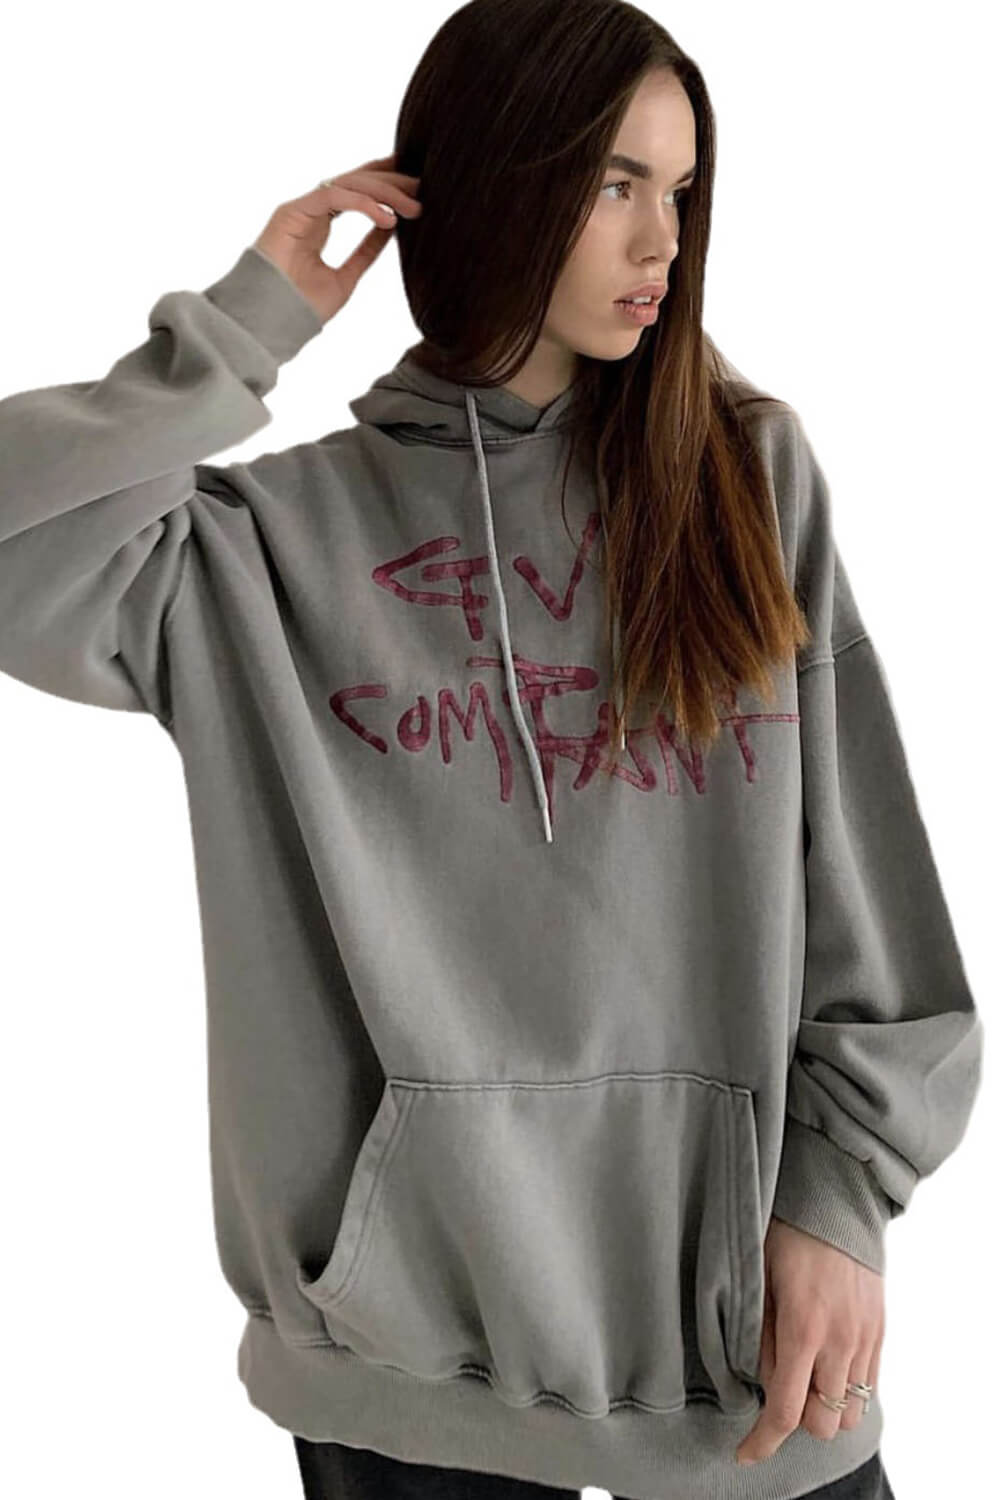 Gvr Company' Drawstring Oversized Pullover Hoodie